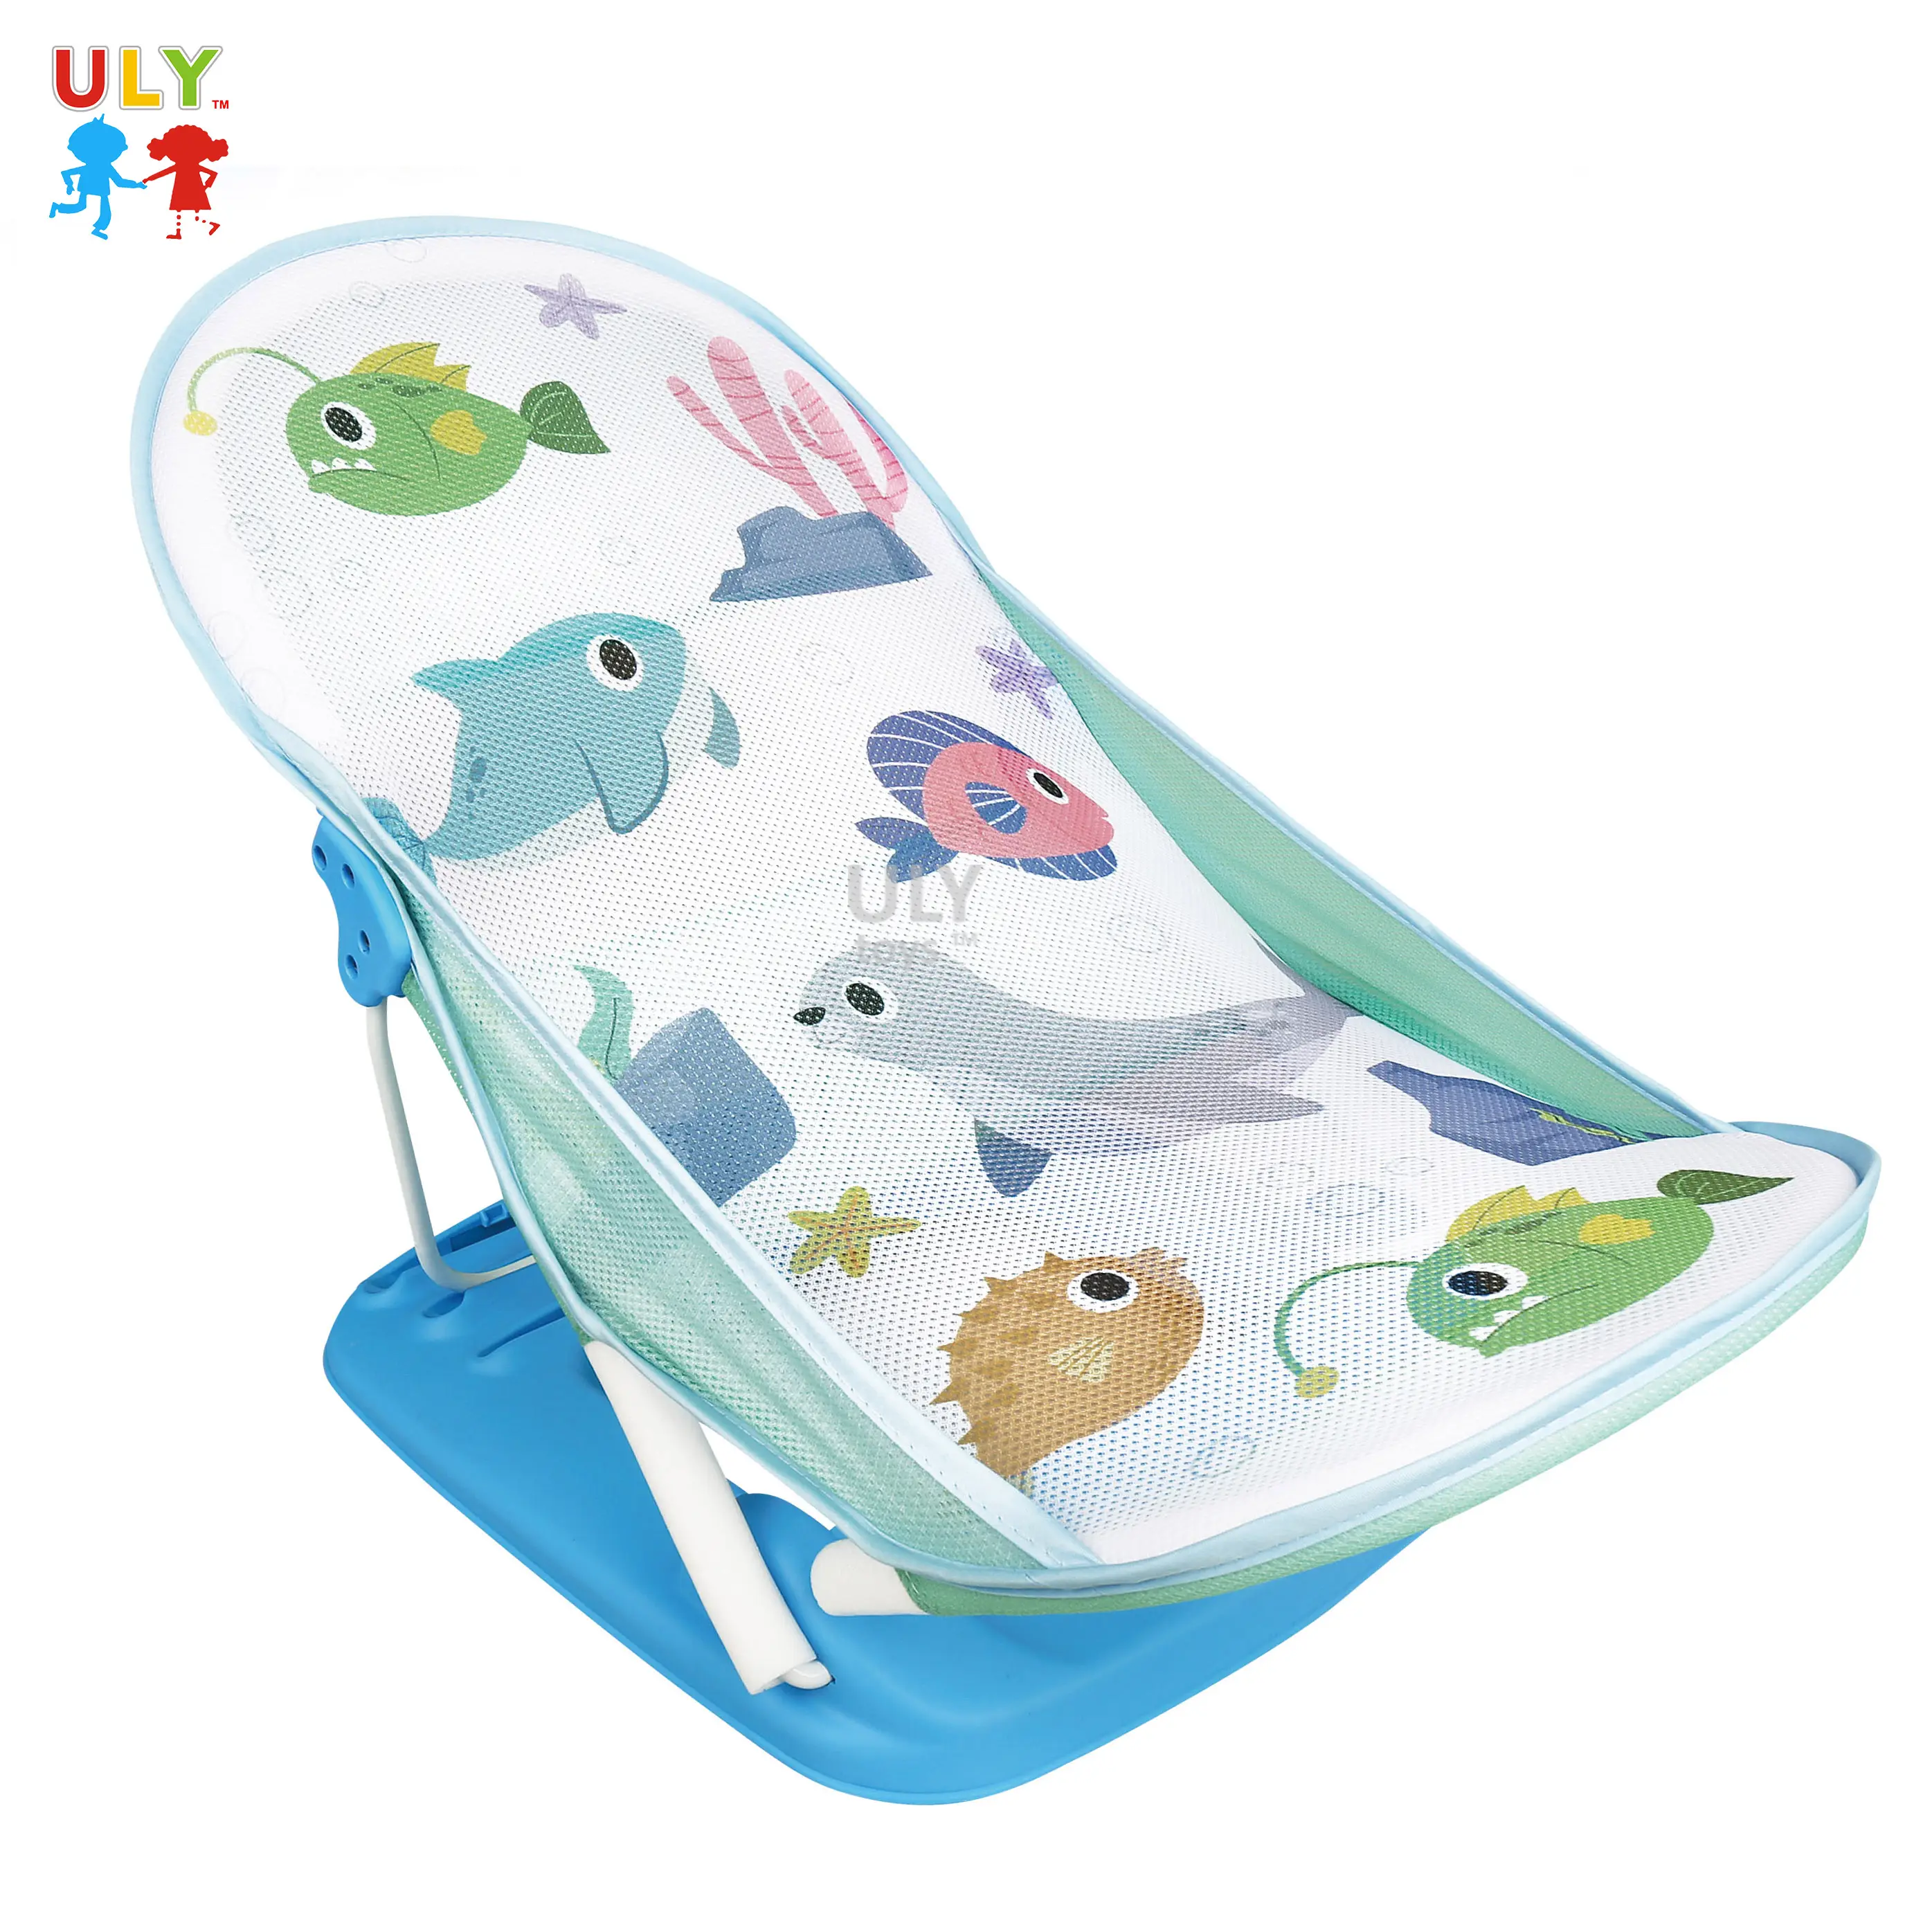 Adjustable Baby Bath Tub Chair Bath Support Seat Easy Carry Baby Bather Shower Chairs For Kid